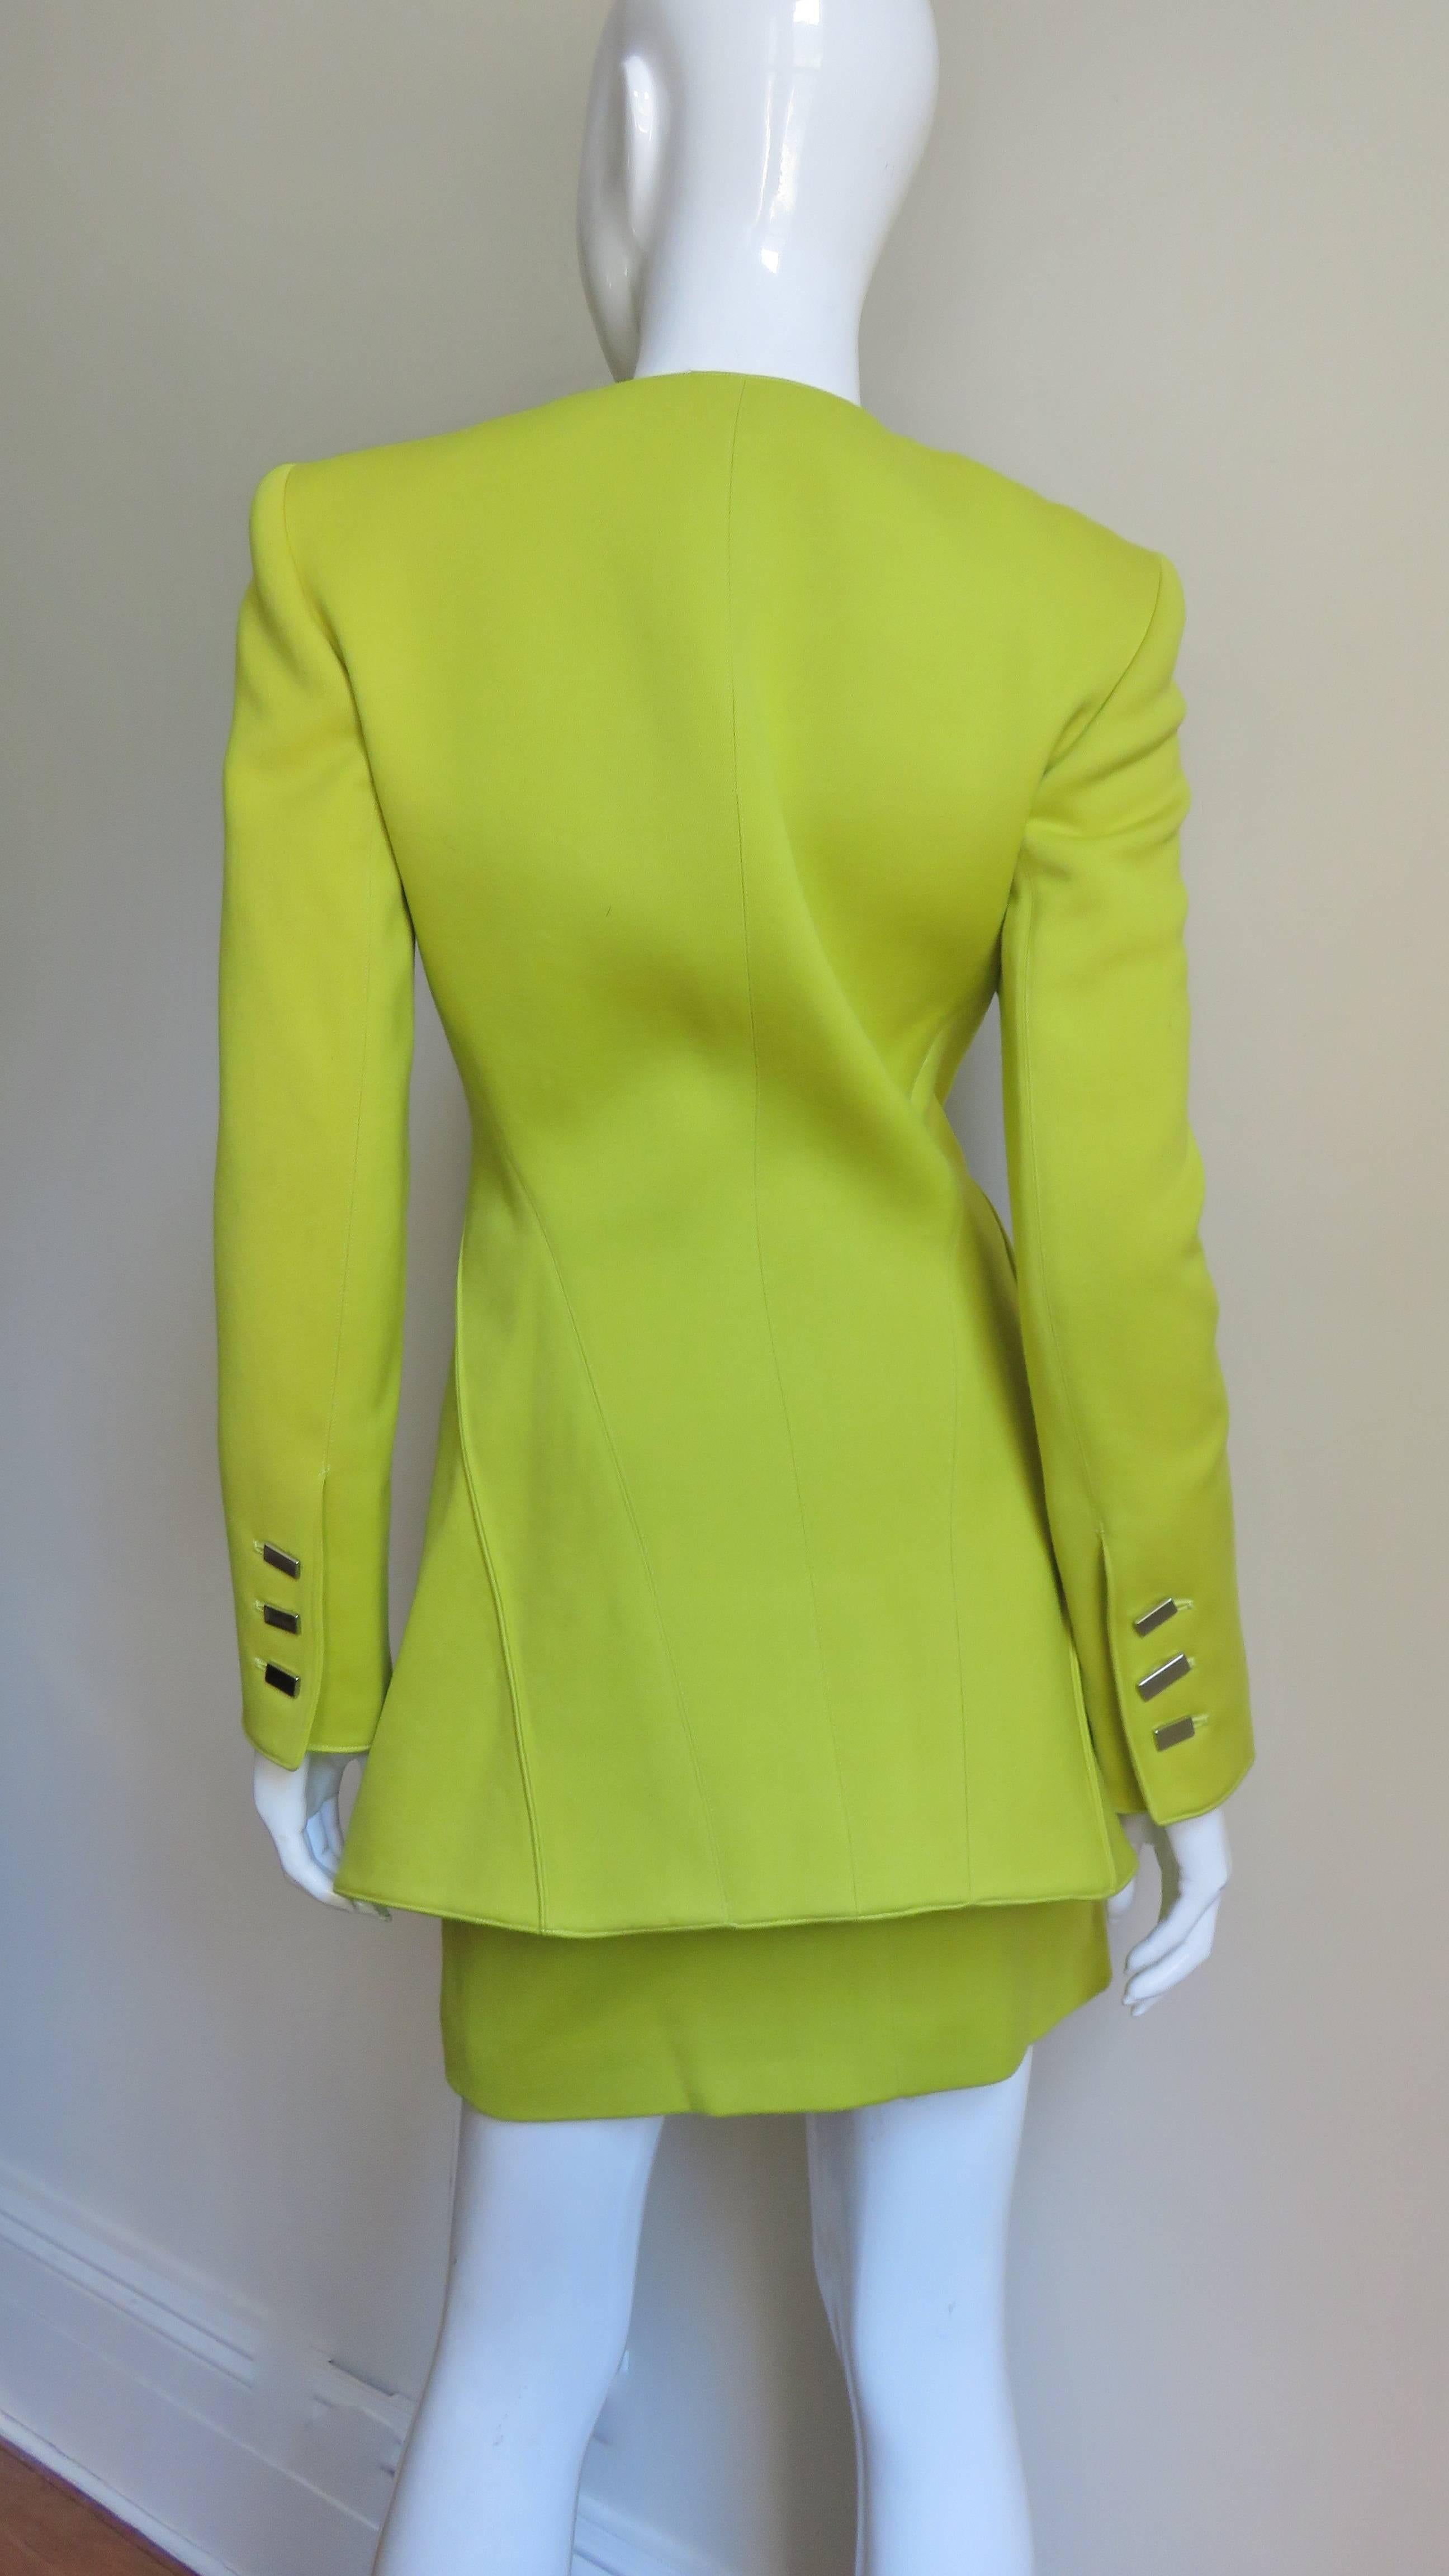  Claude Montana New Neon Futuristic Skirt Suit A/W 1991 For Sale 1